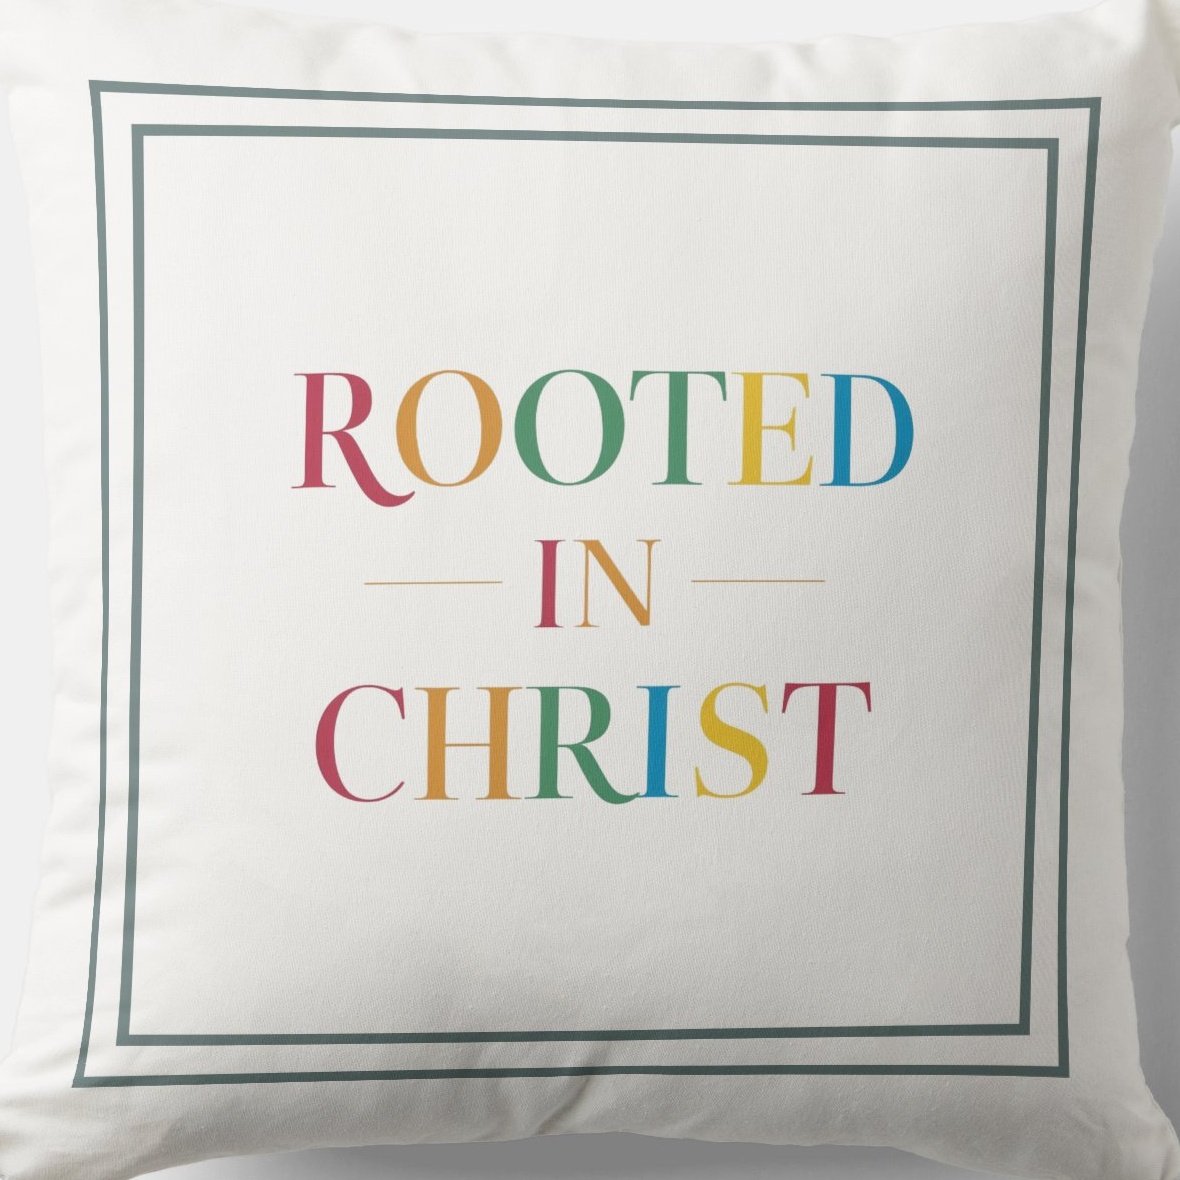 Rooted In Christ Spiritual Reality #Cushion zazzle.com/rooted_in_chri… Throw #Pillow #Blessing #JesusChrist #JesusSaves #Jesus #christian #spiritual #Homedecoration #uniquegift #giftideas #MothersDayGifts #giftformom #giftidea #HolySpirit #pillows #giftshop #giftsforher #giftsformom